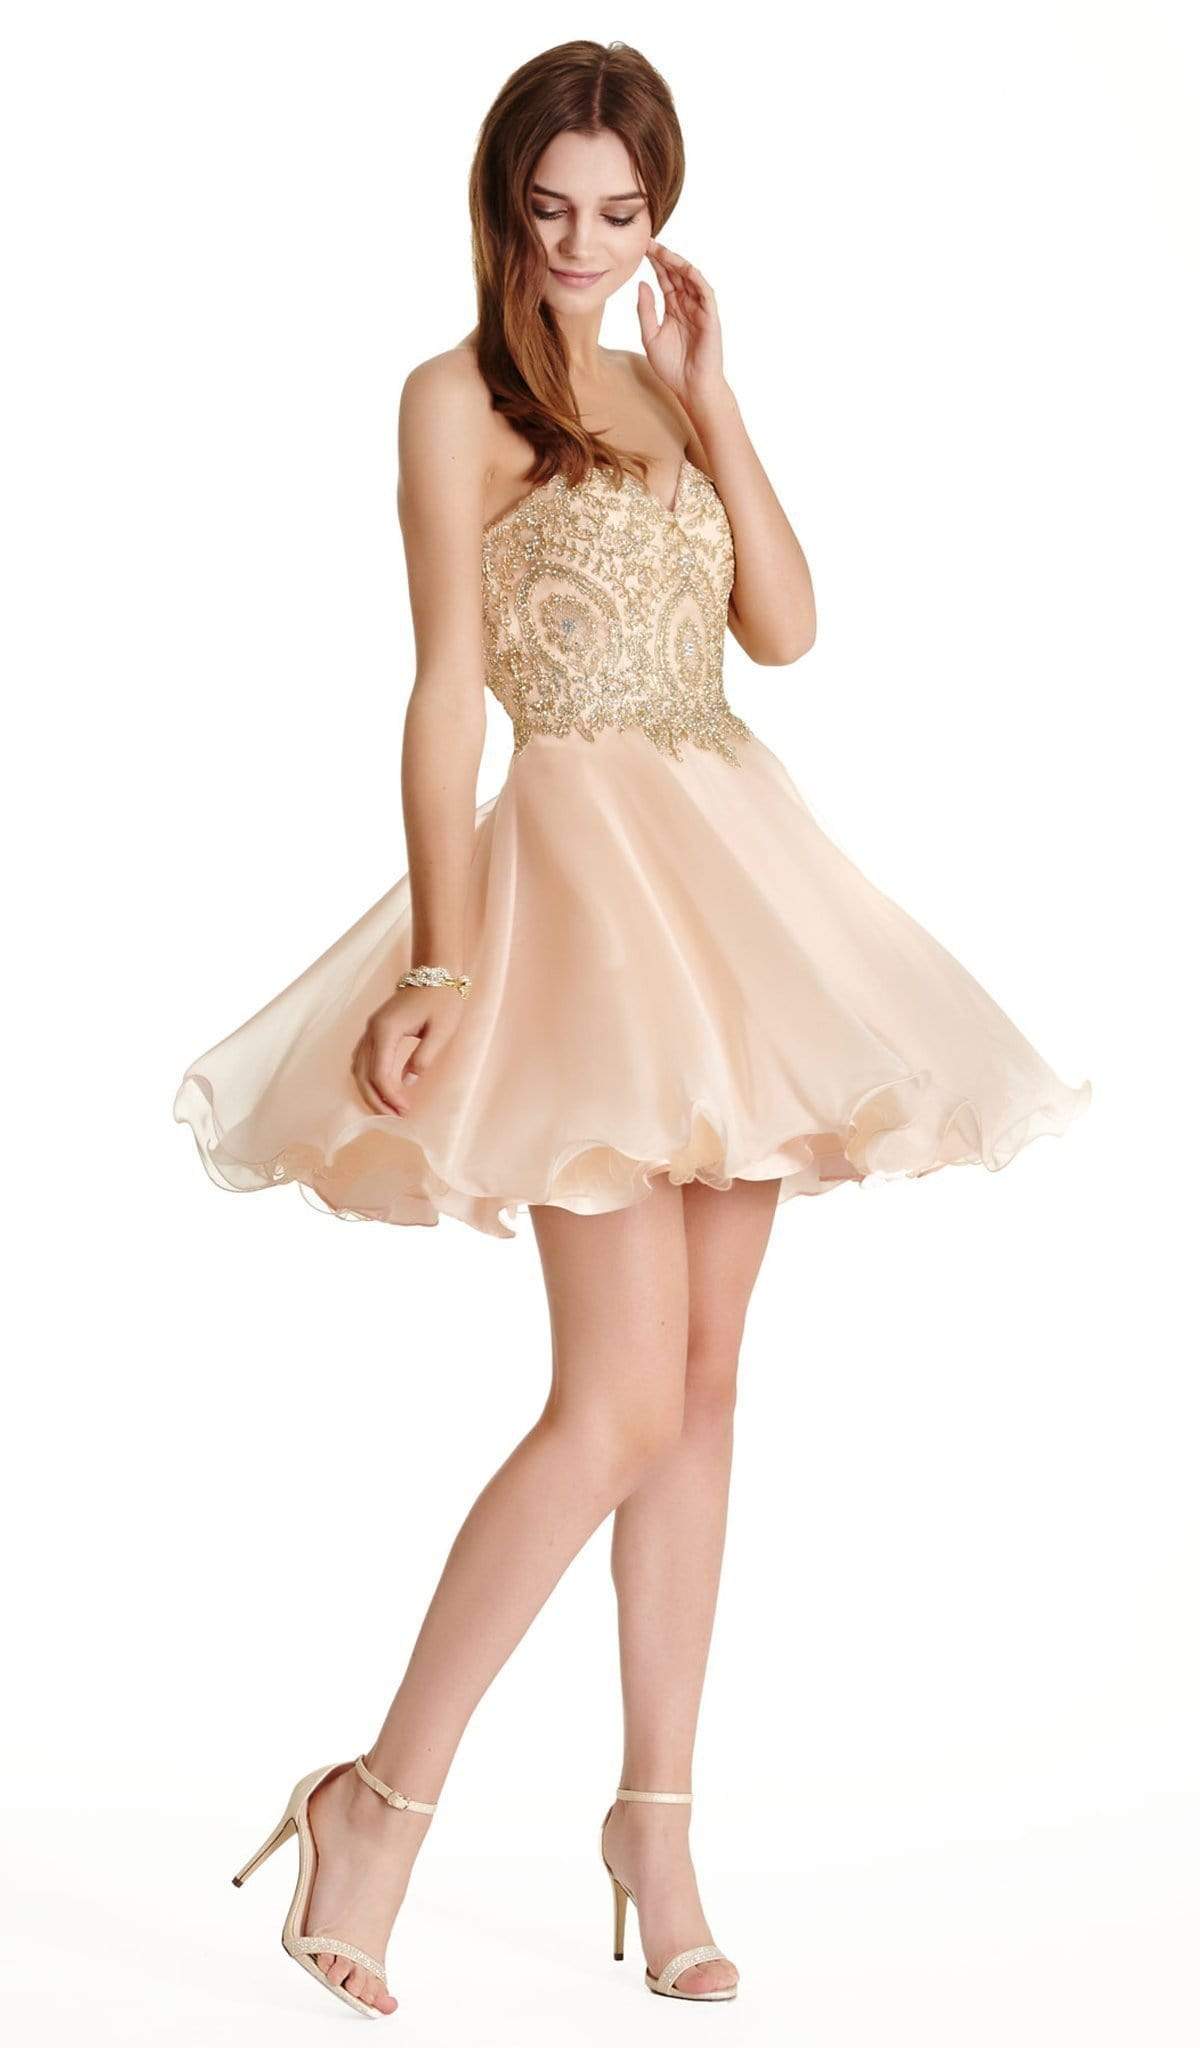 Aspeed Design - Gilded Sweetheart A-line Affordable Prom Dress
